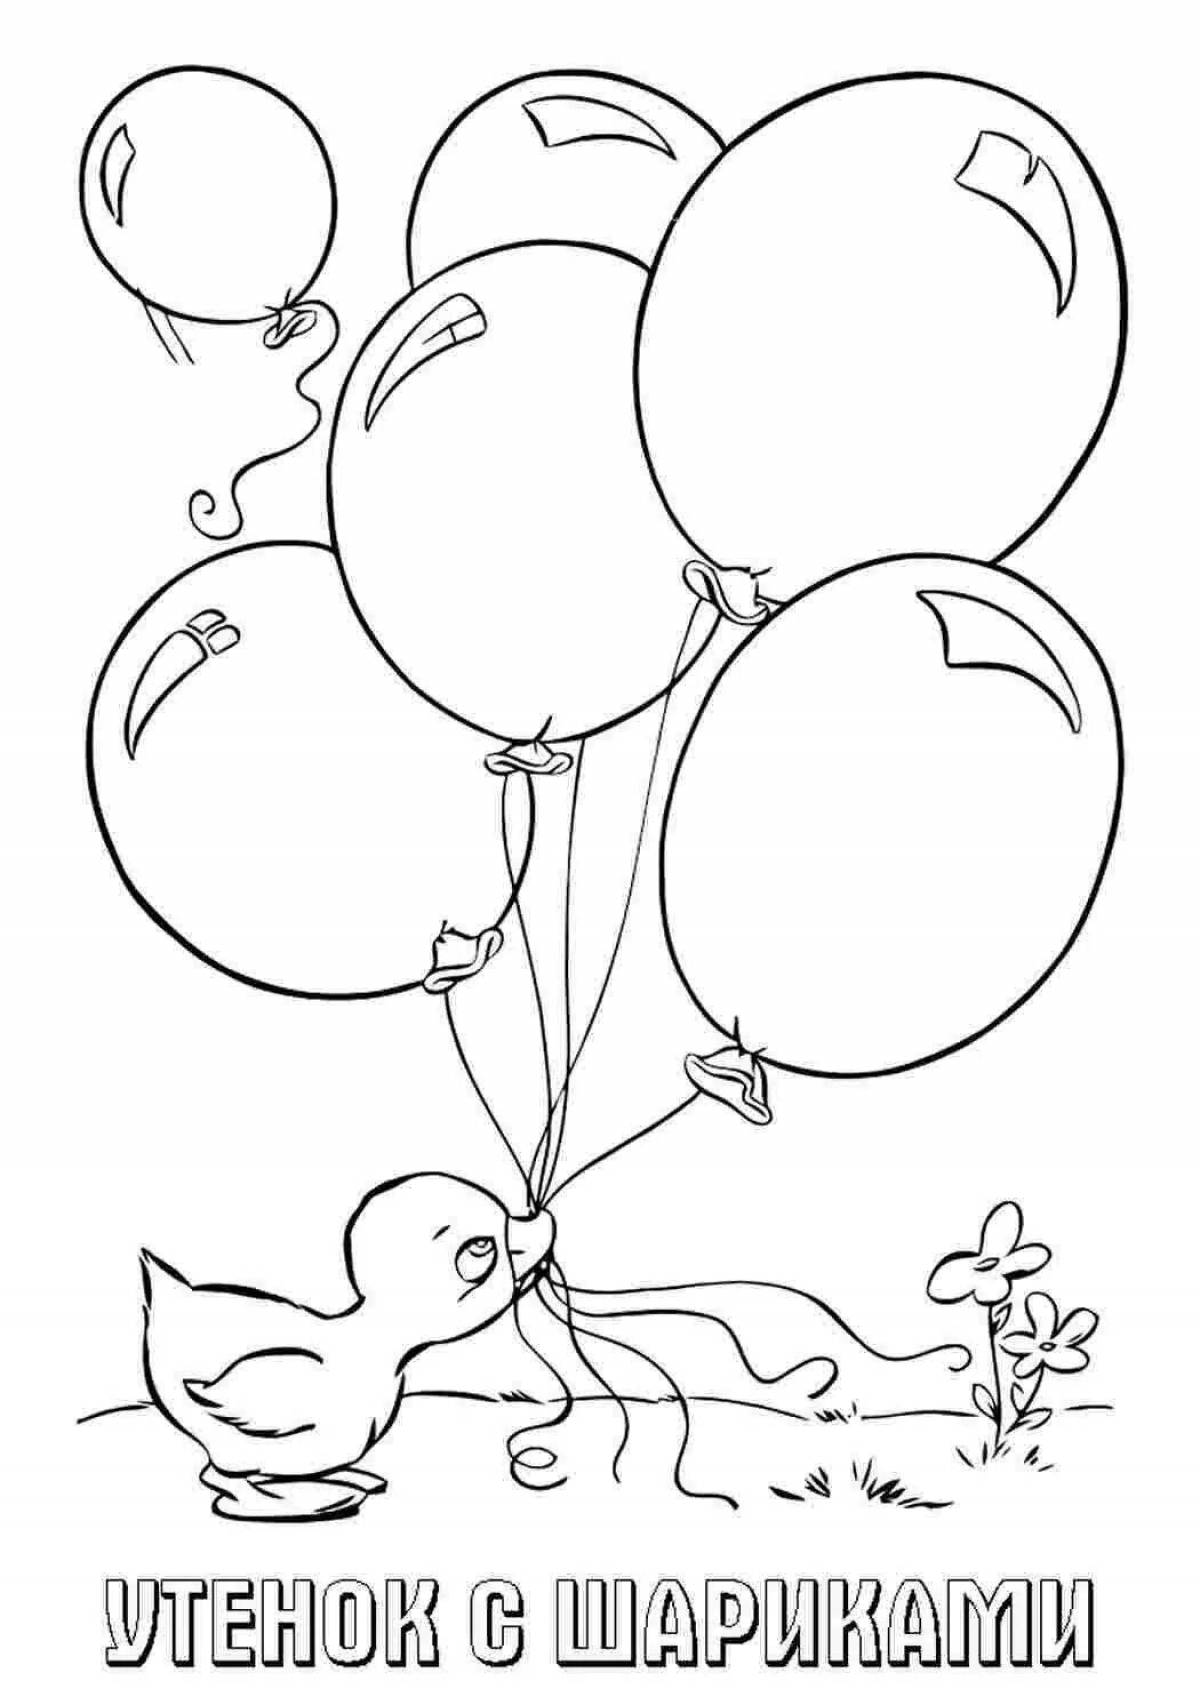 Glitter ball coloring page for children 2-3 years old